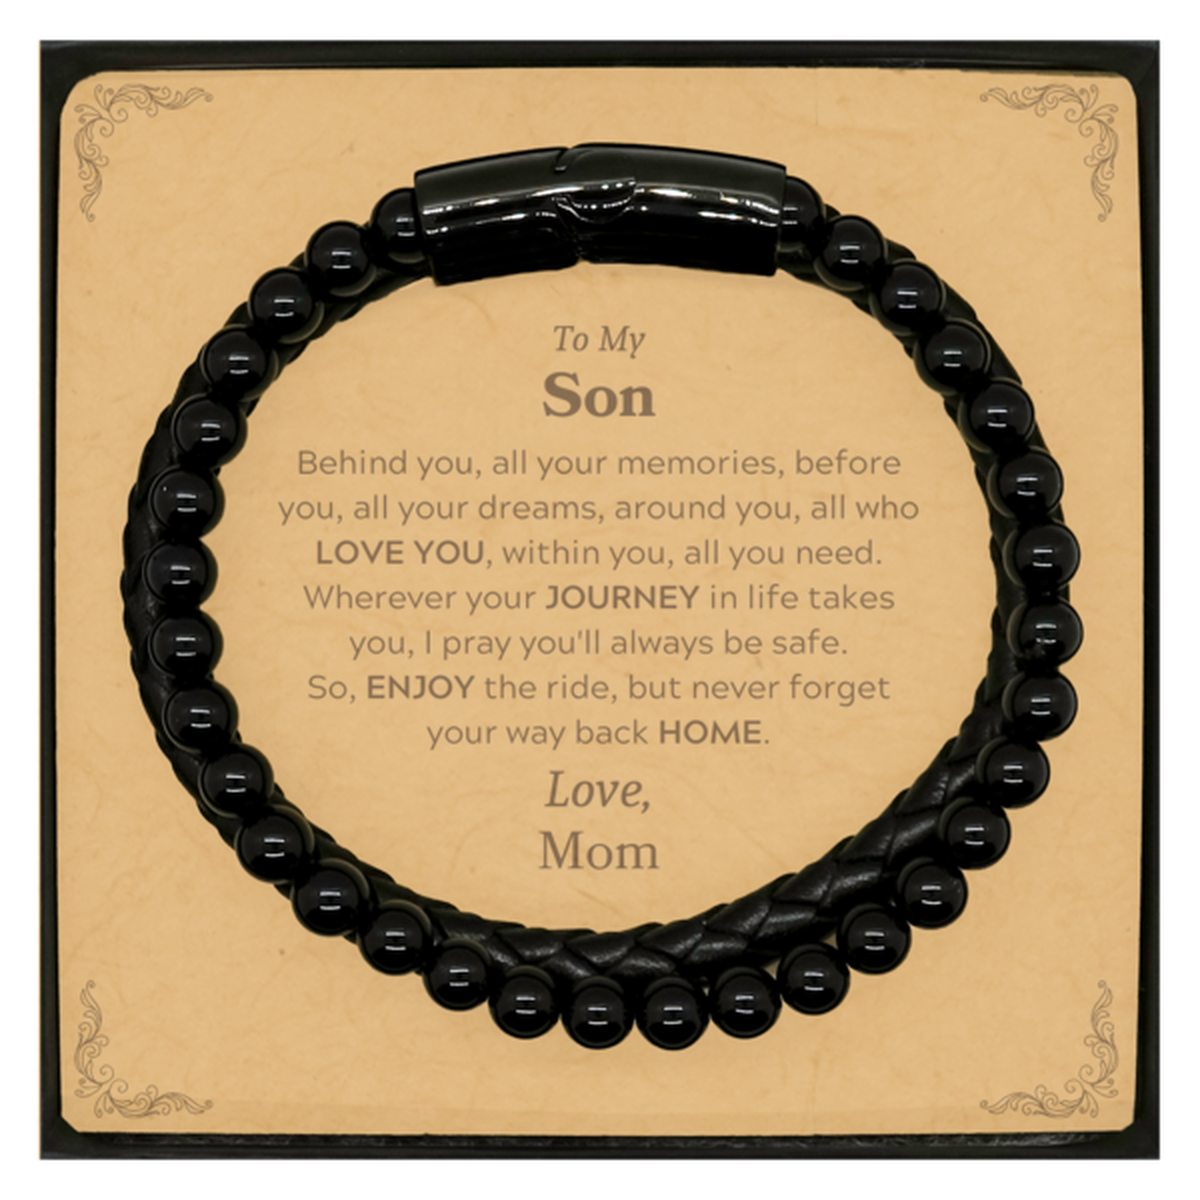 To My Son Graduation Gifts from Mom, Son Stone Leather Bracelets Christmas Birthday Gifts for Son Behind you, all your memories, before you, all your dreams. Love, Mom